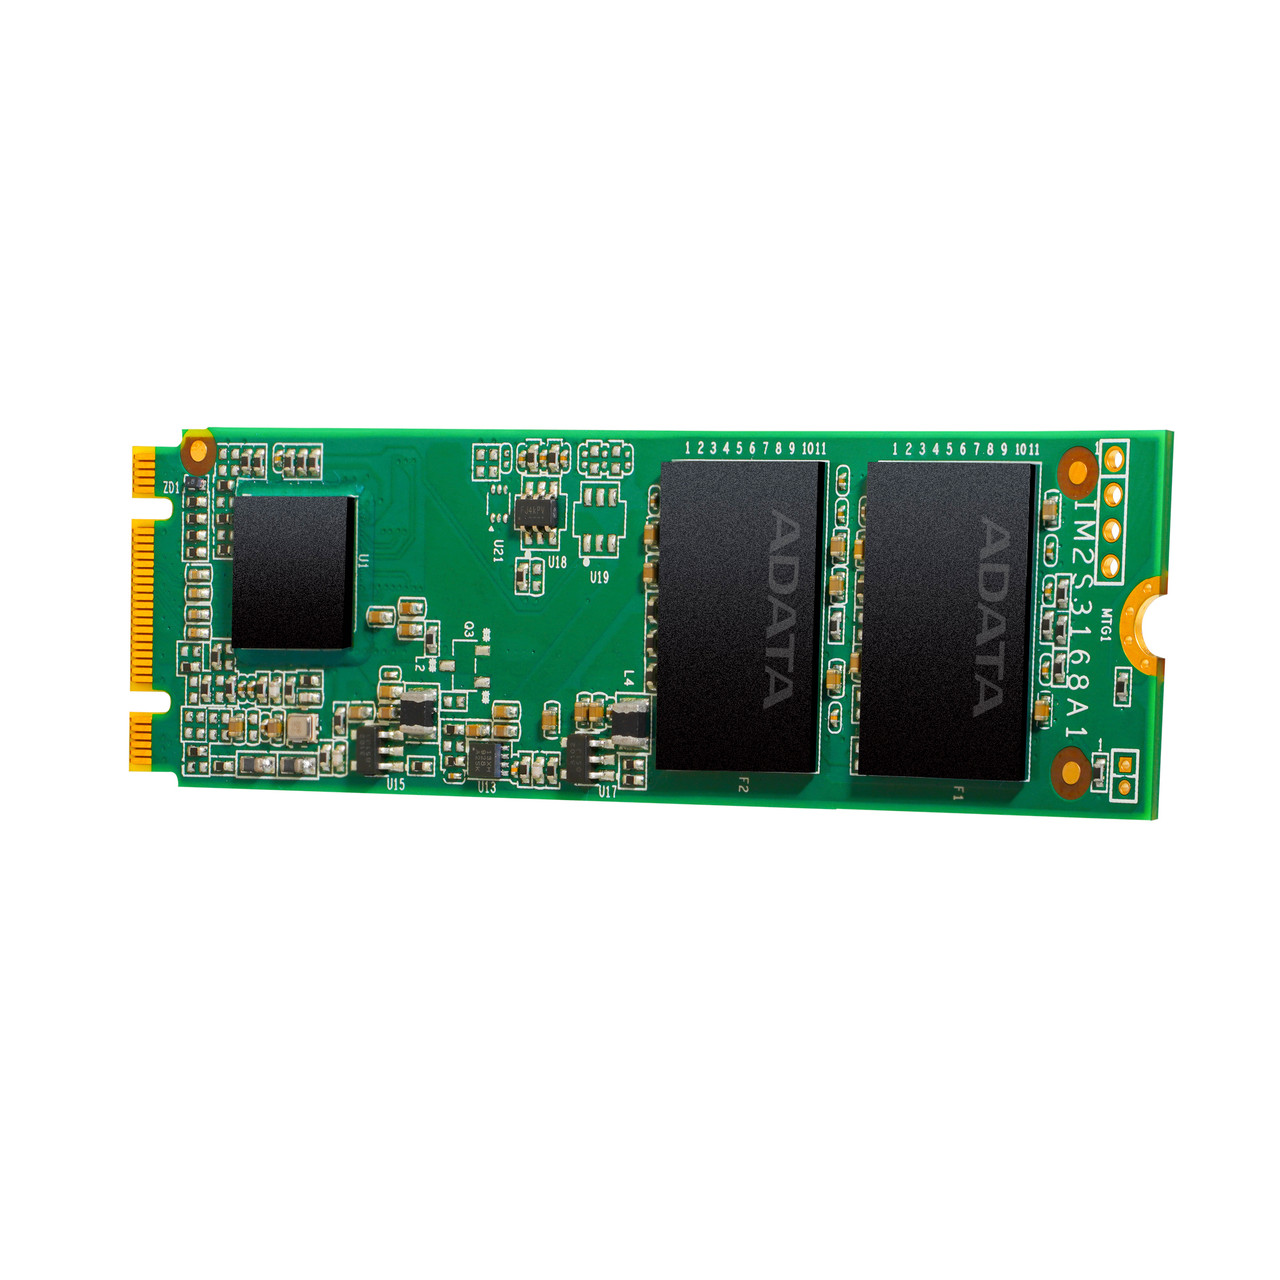 ADATA Ultimate Series: SU650 240GB SATA M.2 2280 Solid State Drive | SU650NS38 | NAND - Green | Up to 550MBps - 1PK - ADATA